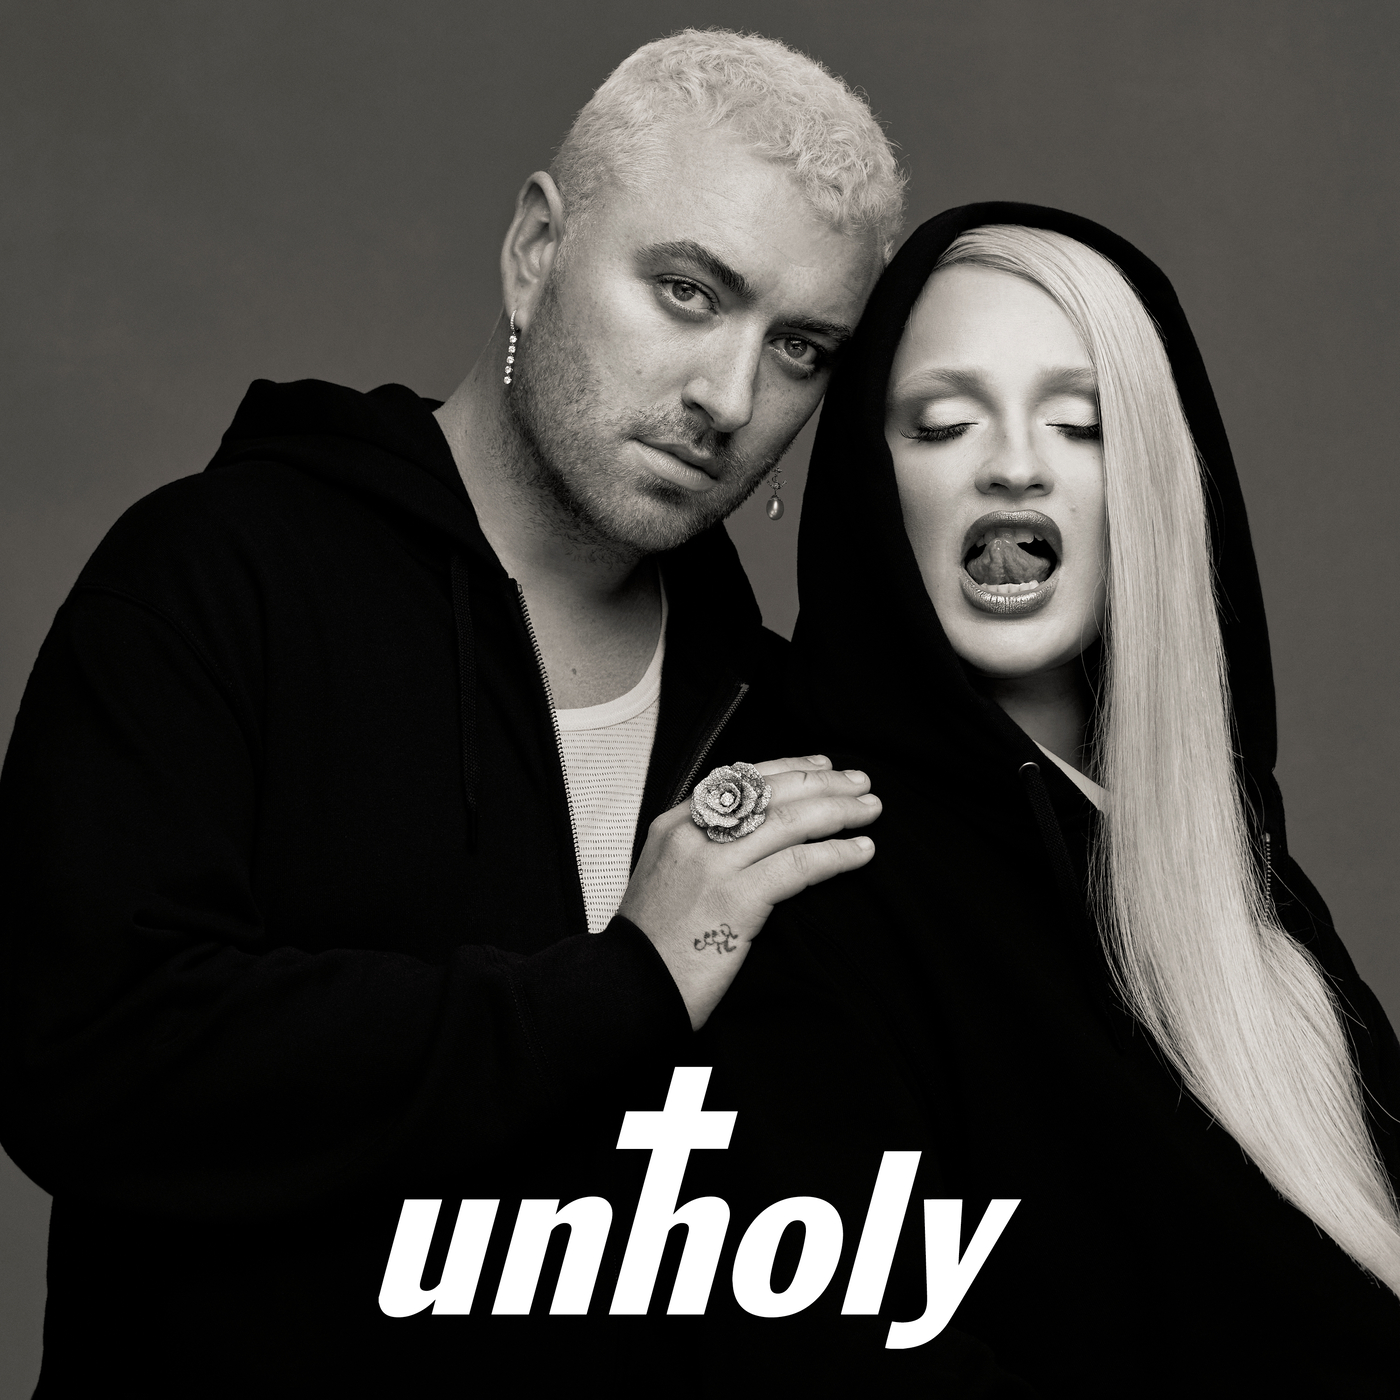 I-download Unholy